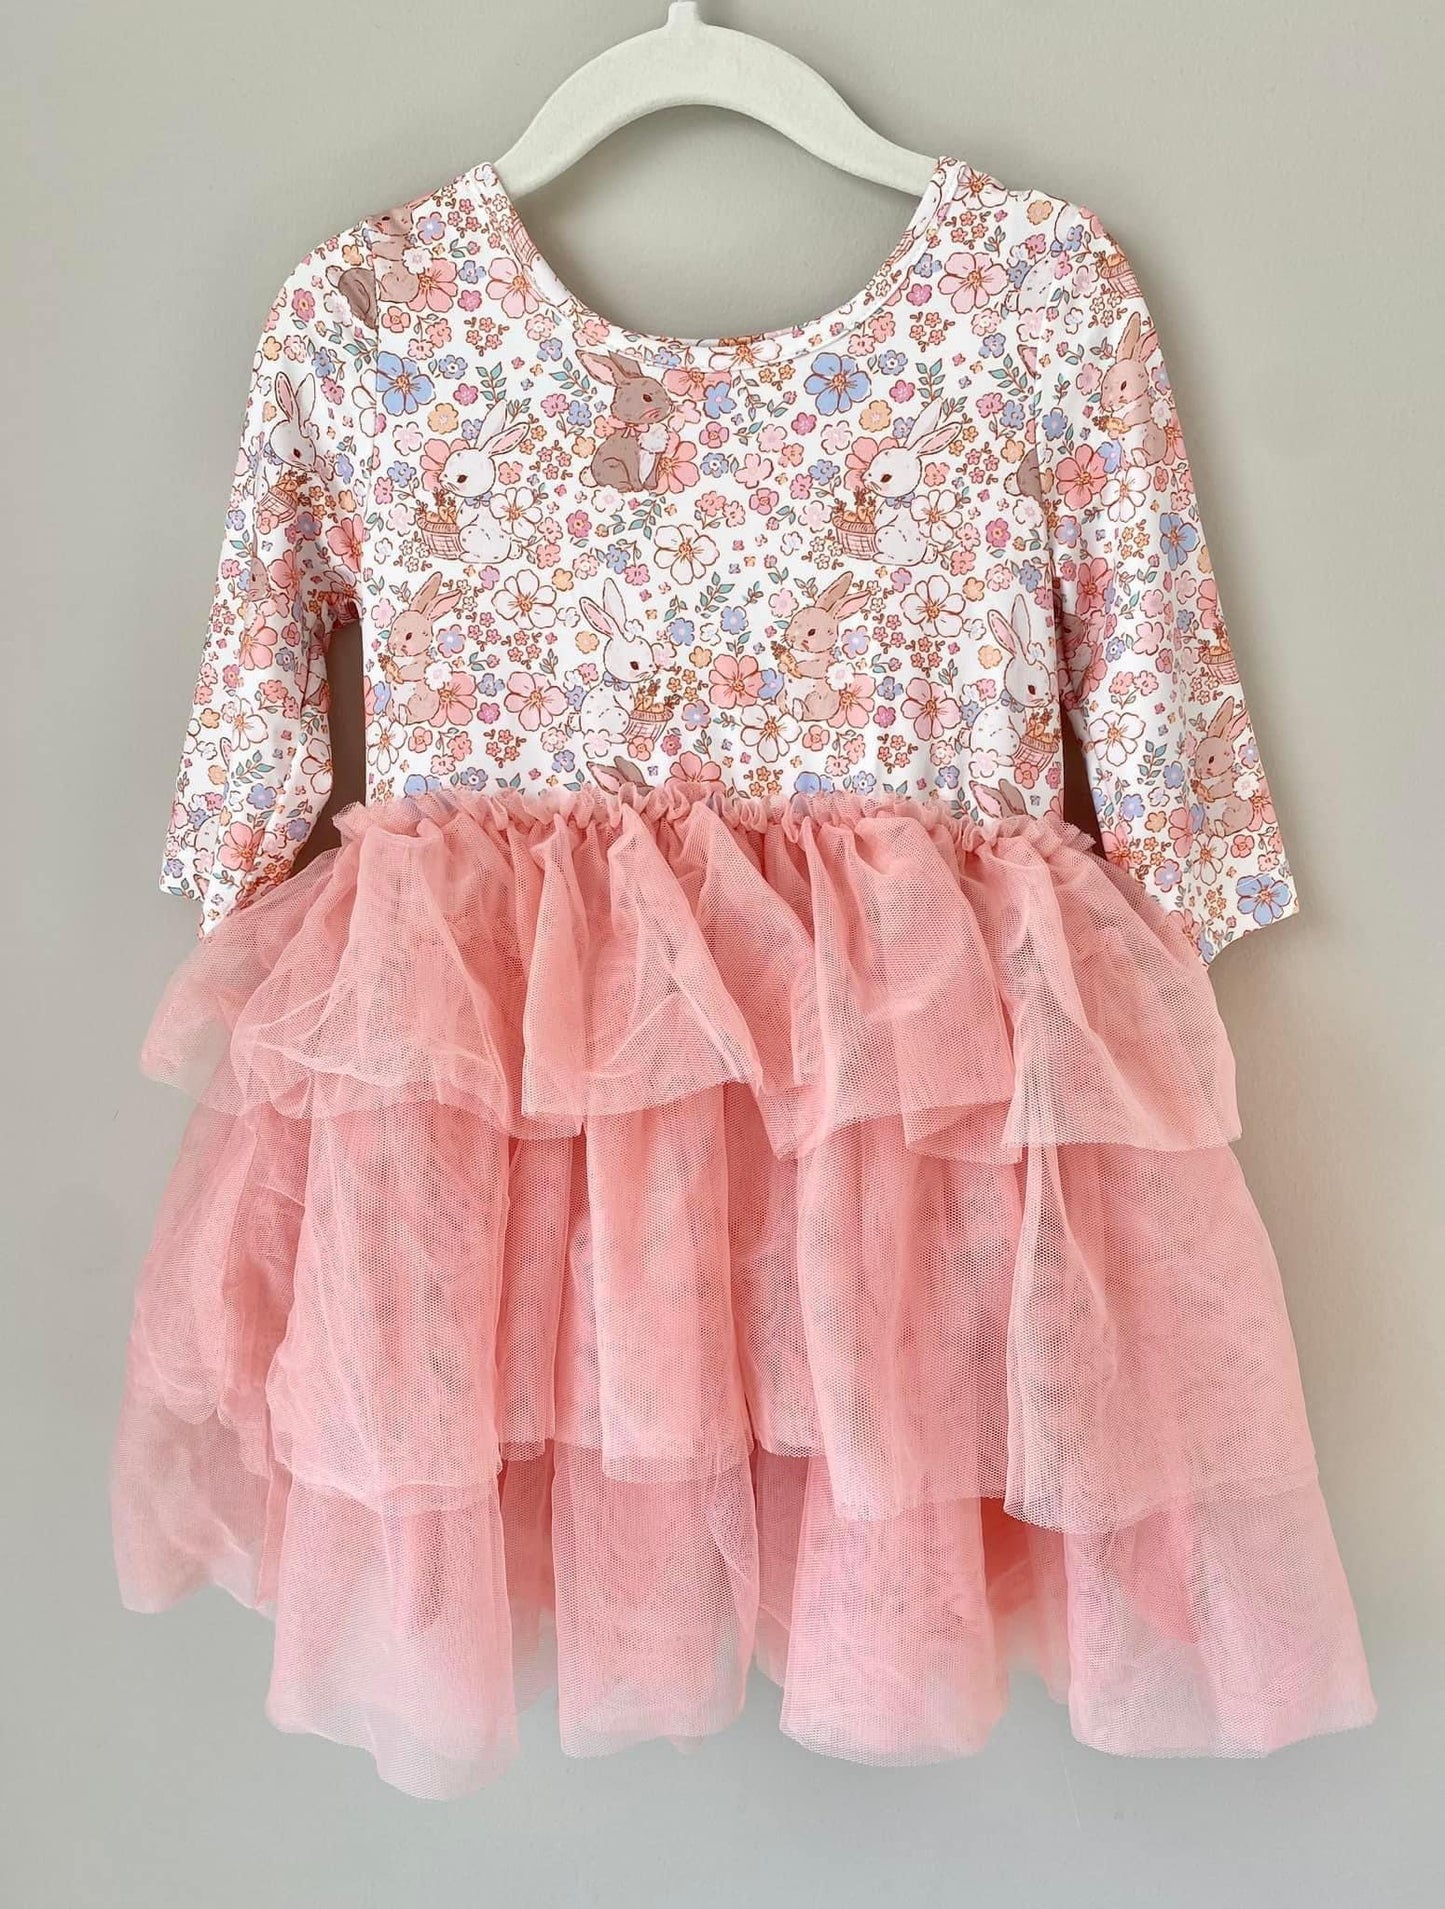 Bunny floral tulle dress